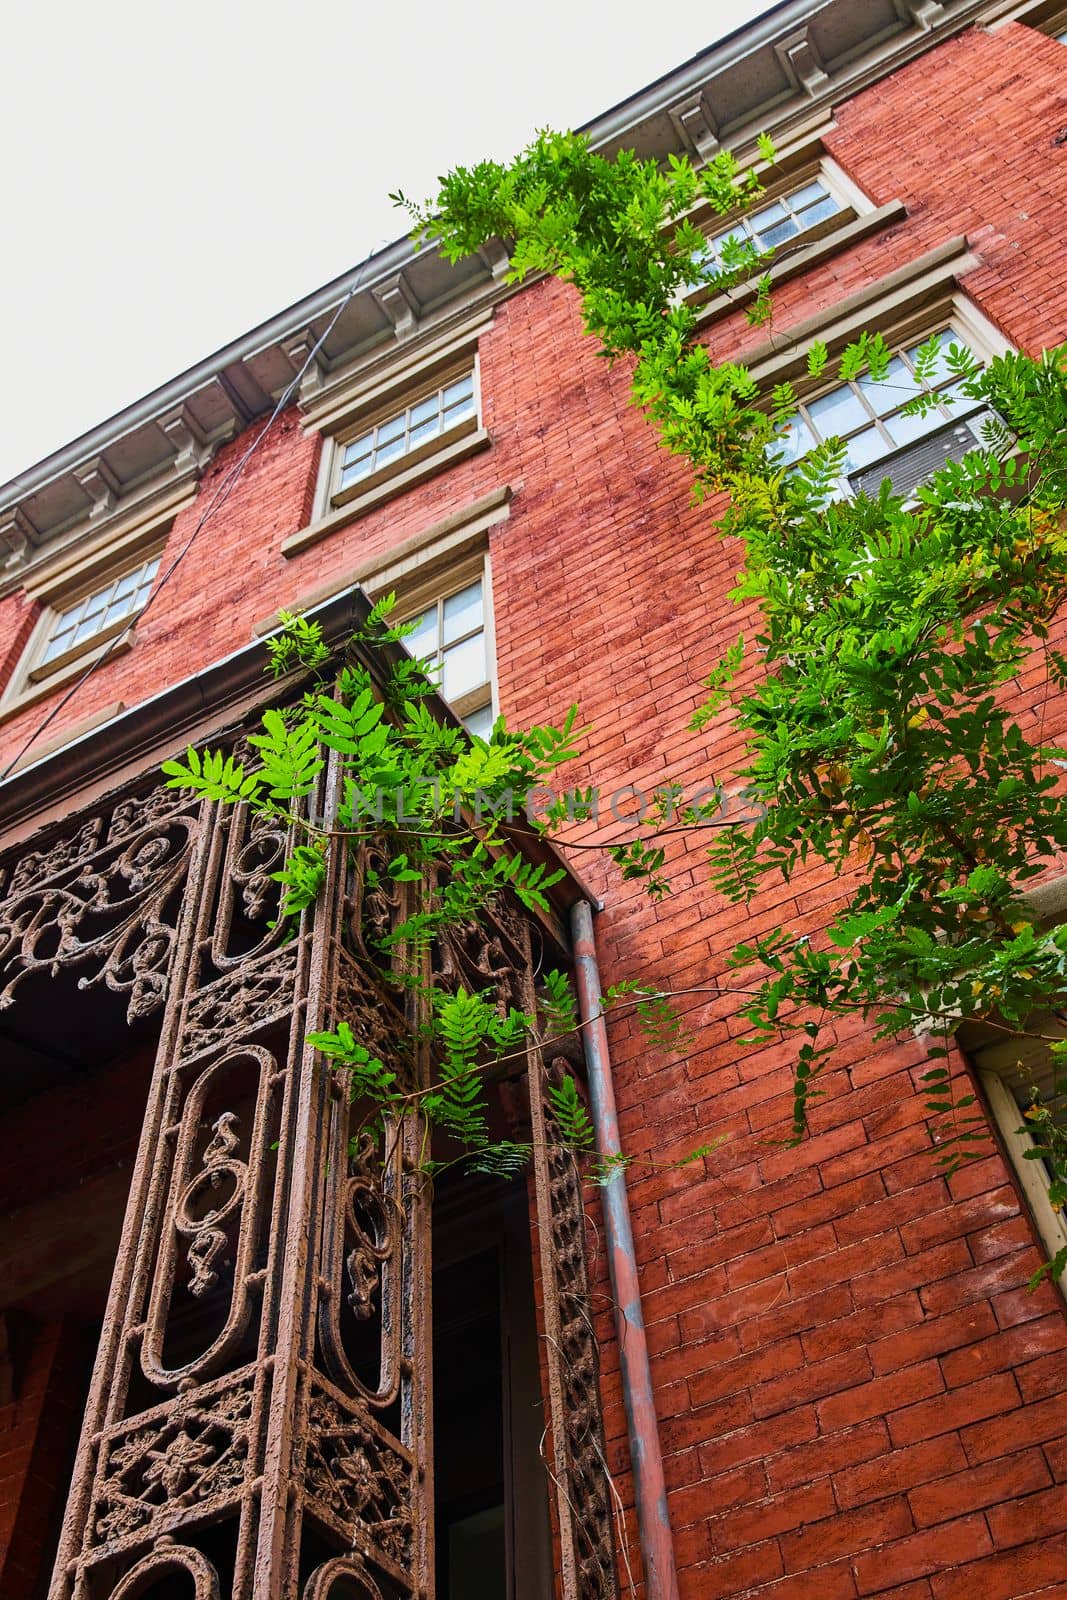 Image of Looking up brick building with green ferns growing around wire